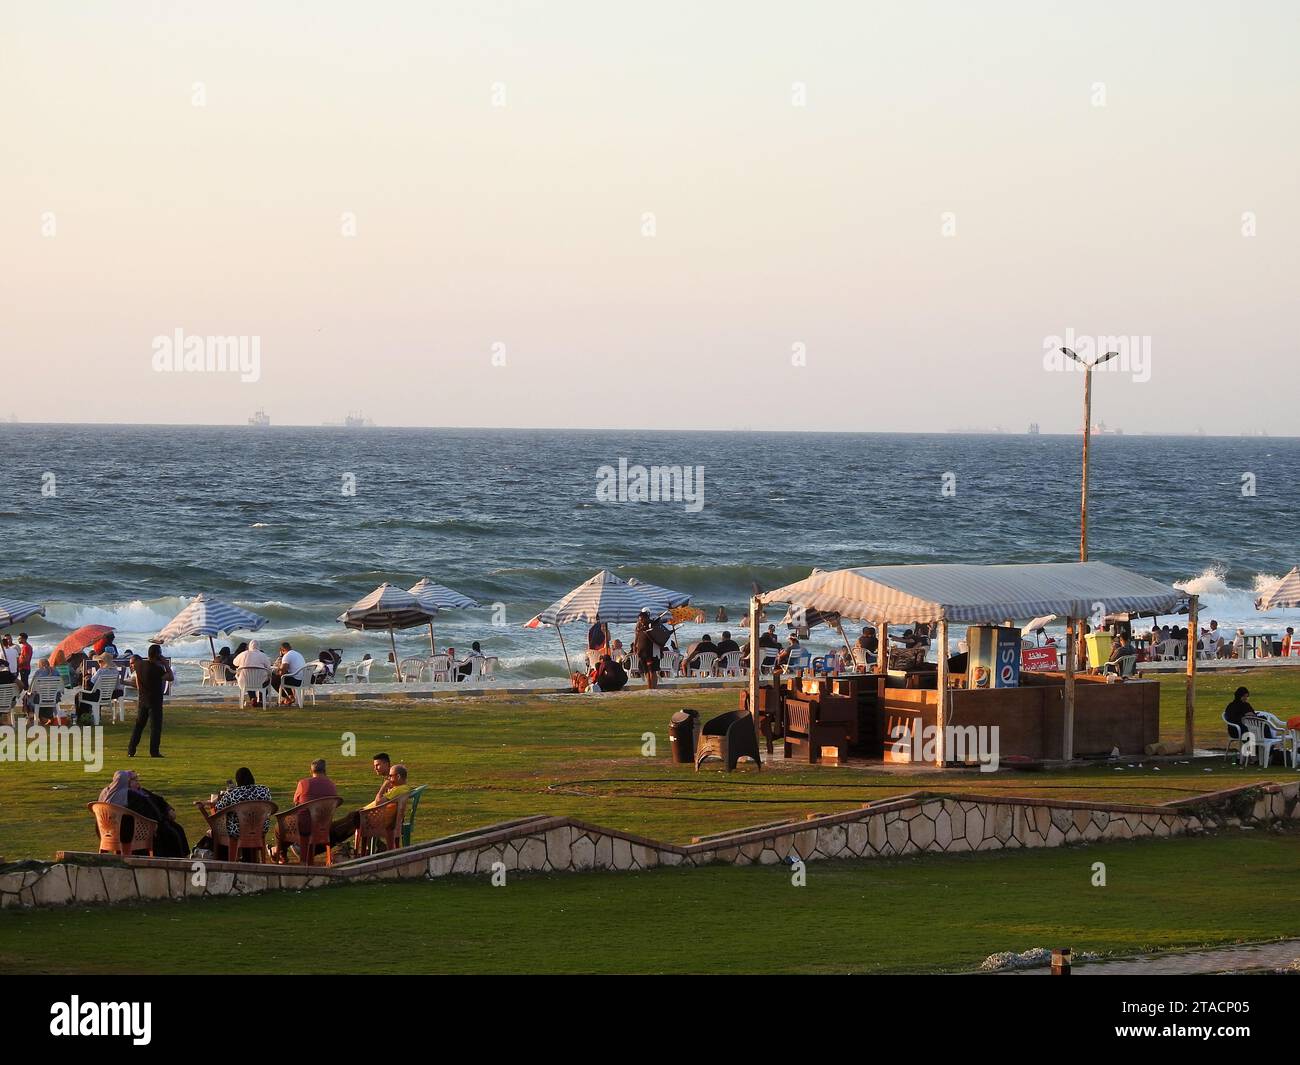 Alexandria, Egypt, September 9 2022: Alexandria beach, with people on the shore having fun and enjoying their holiday summertime, with the Mediterrane Stock Photo